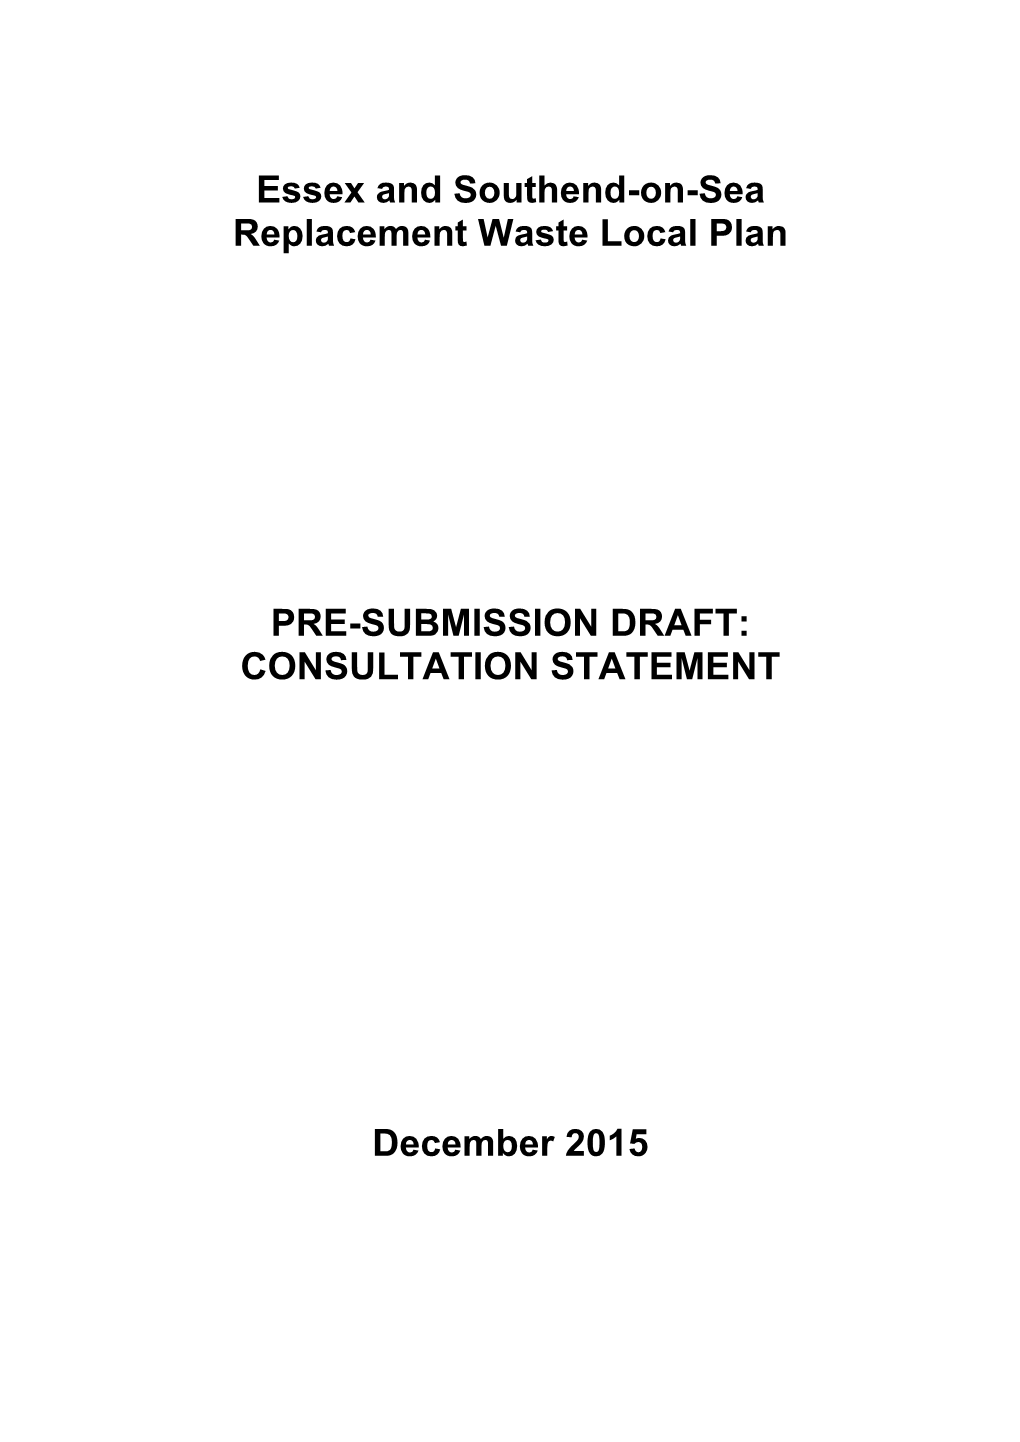 Essex and Southend-On-Sea Replacement Waste Local Plan